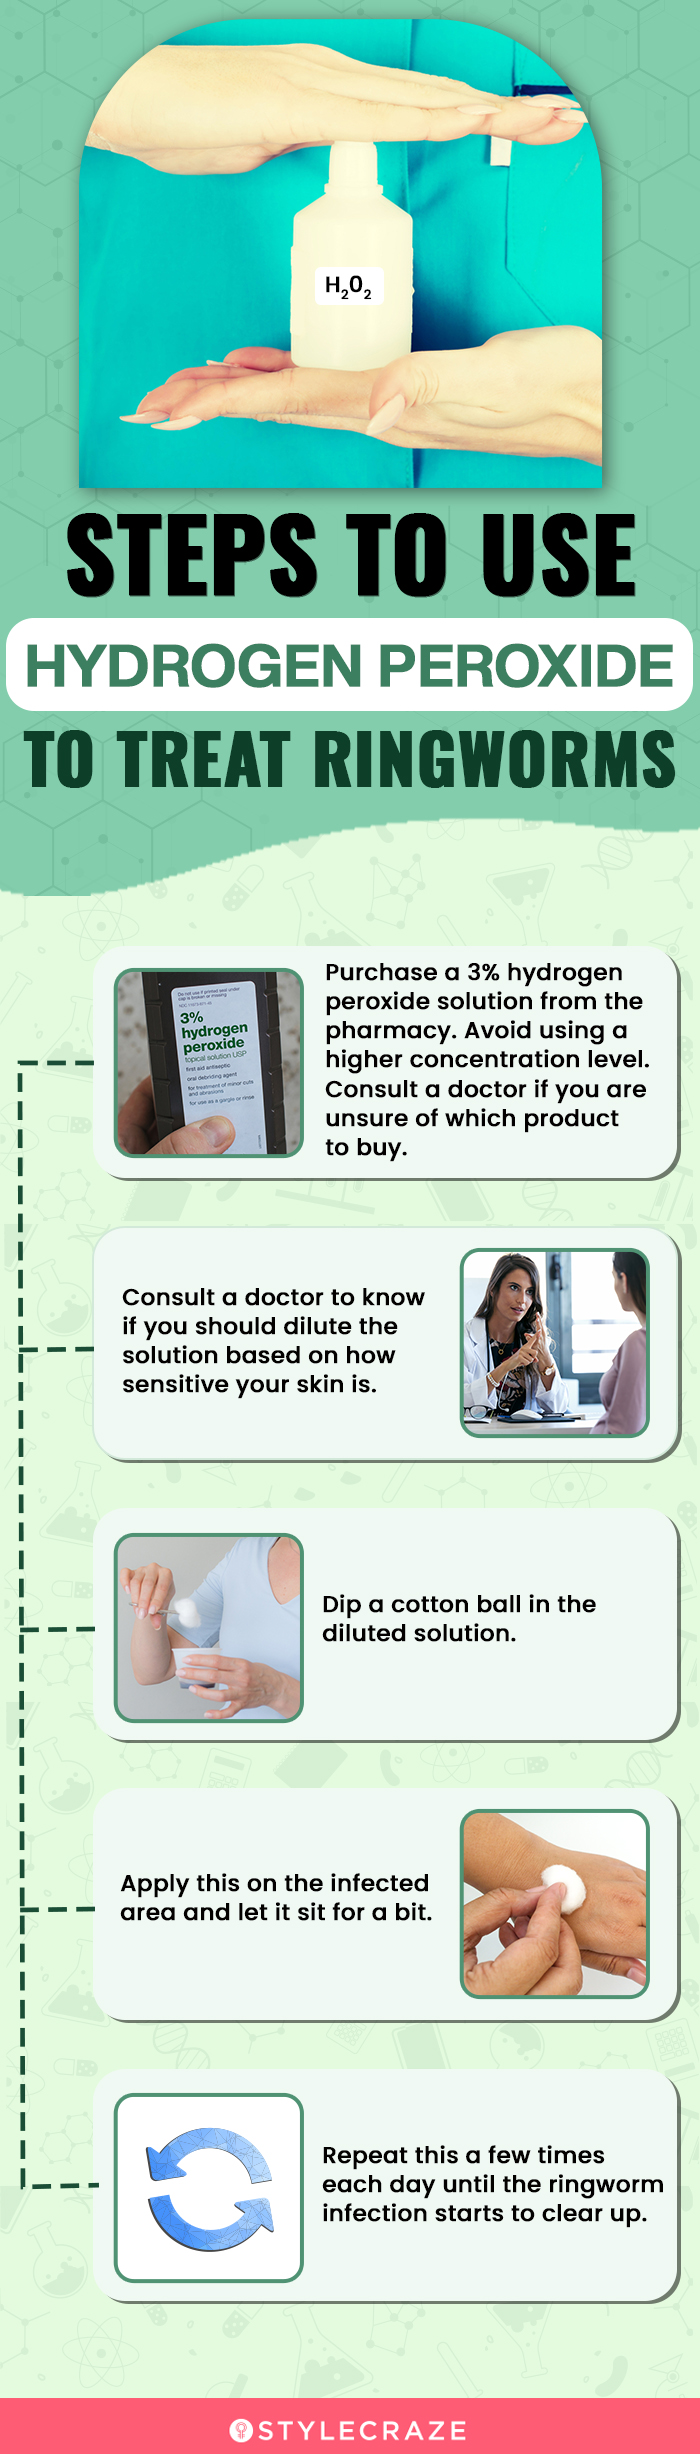 steps to use hydrogen peroxide to treat ringworms (infographic)